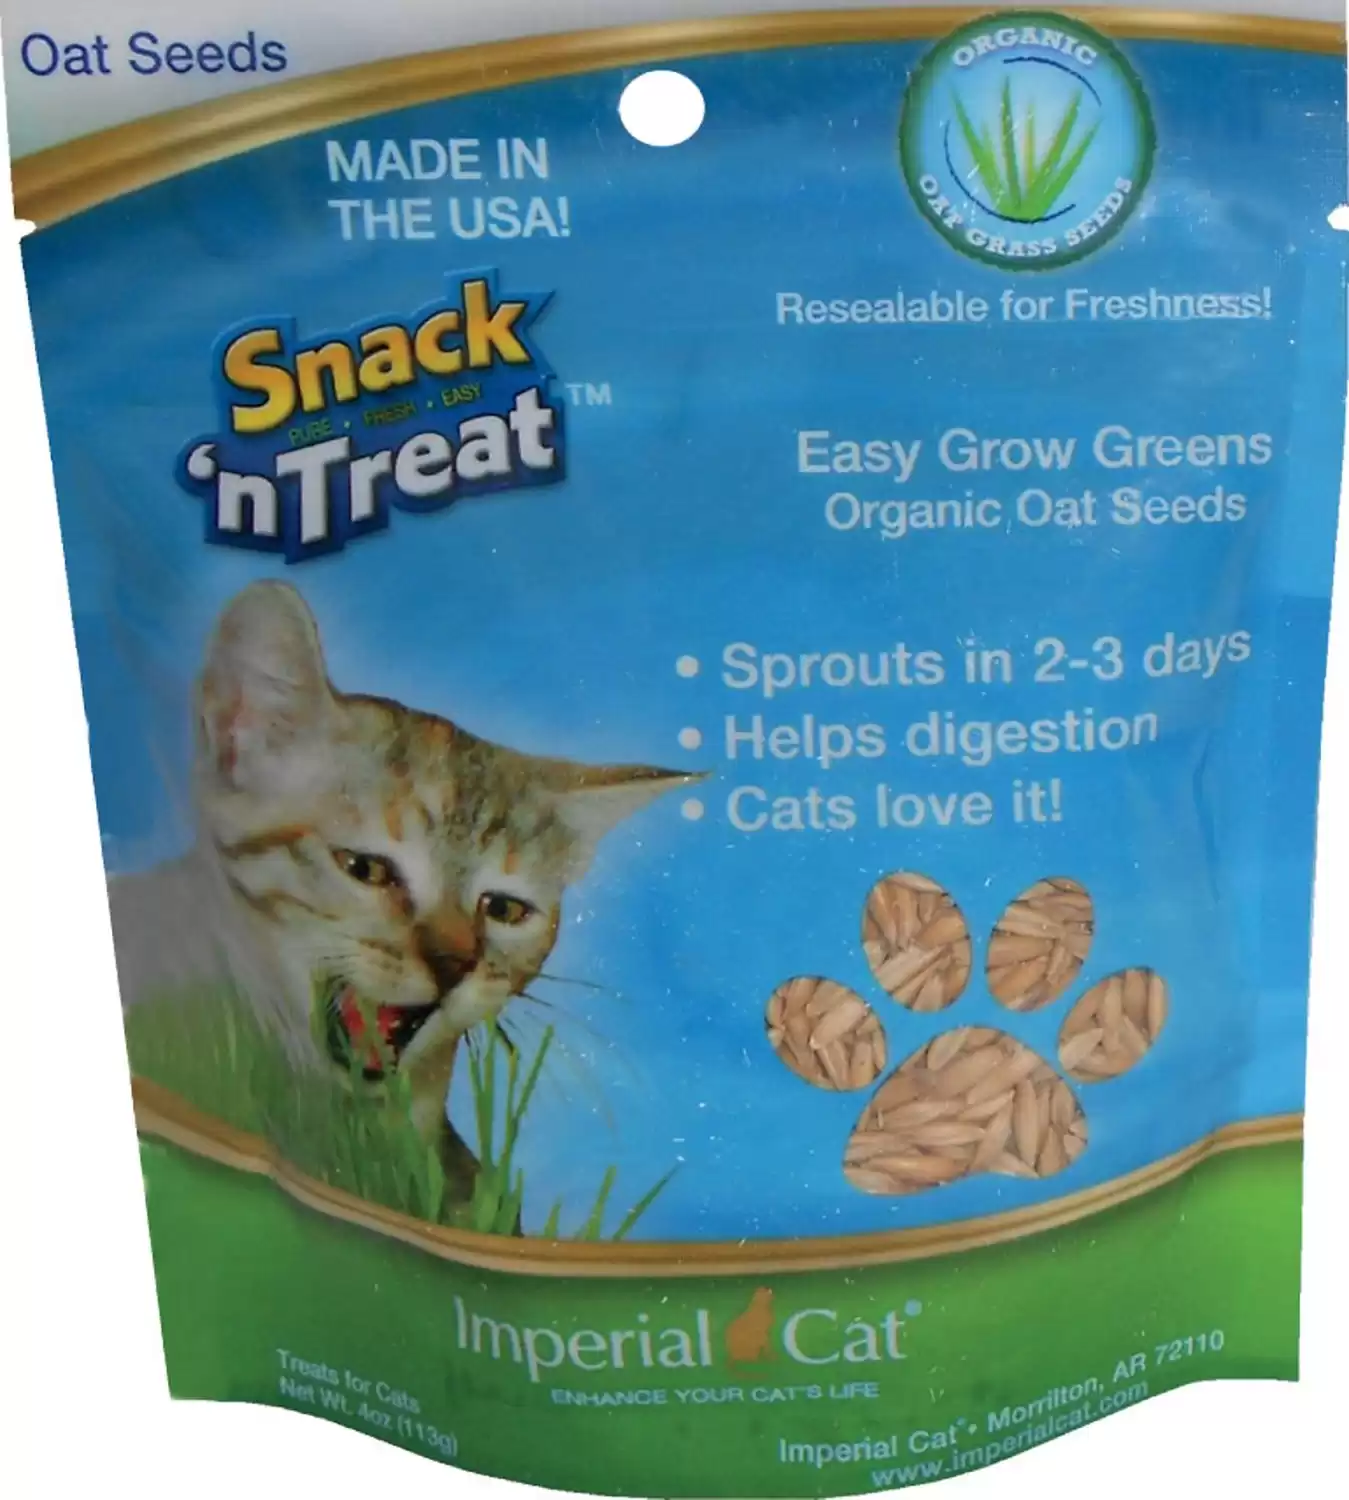 Imperial Cat Oat Grass Seeds